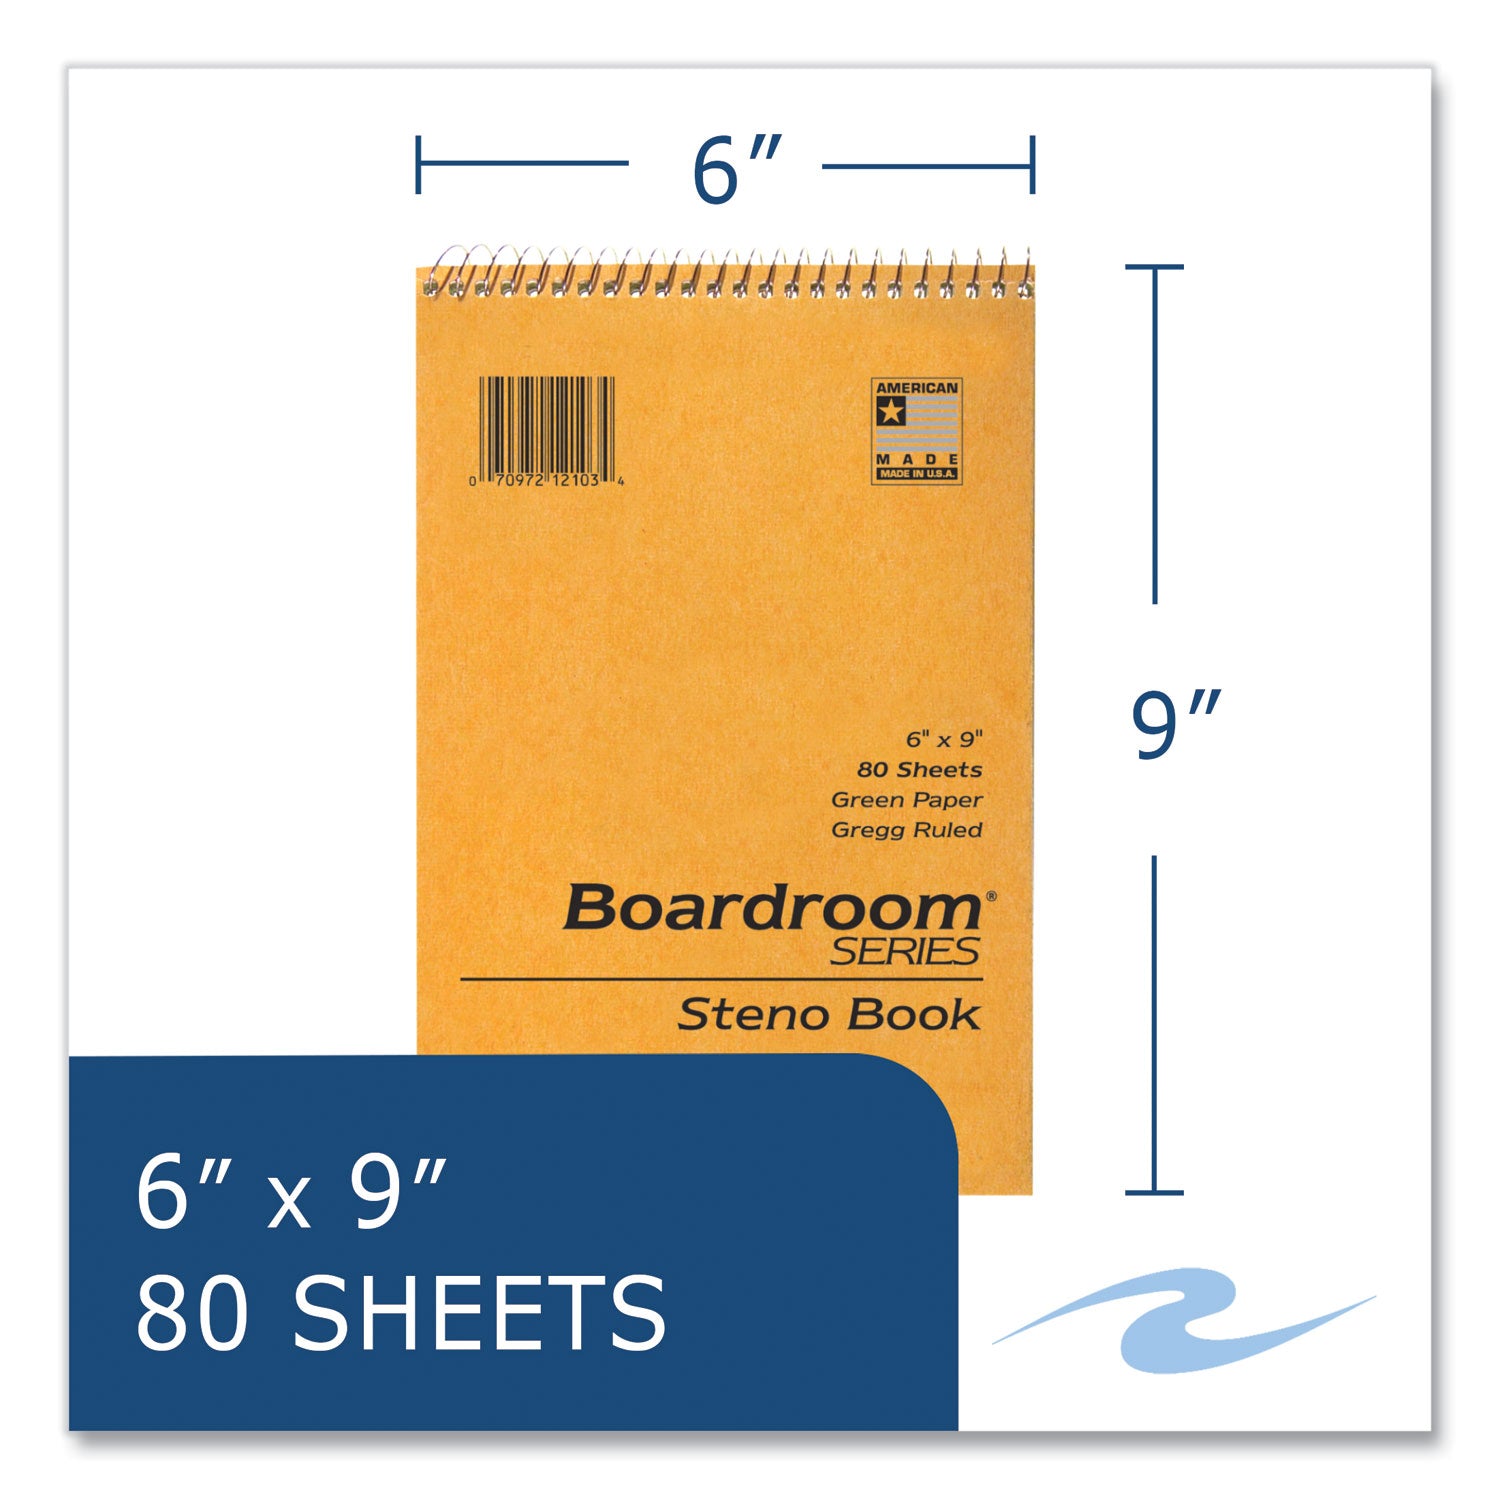 boardroom-series-steno-pad-gregg-ruled-brown-cover-80-green-6-x-9-sheets-72-pads-carton-ships-in-4-6-business-days_roa12103cs - 7